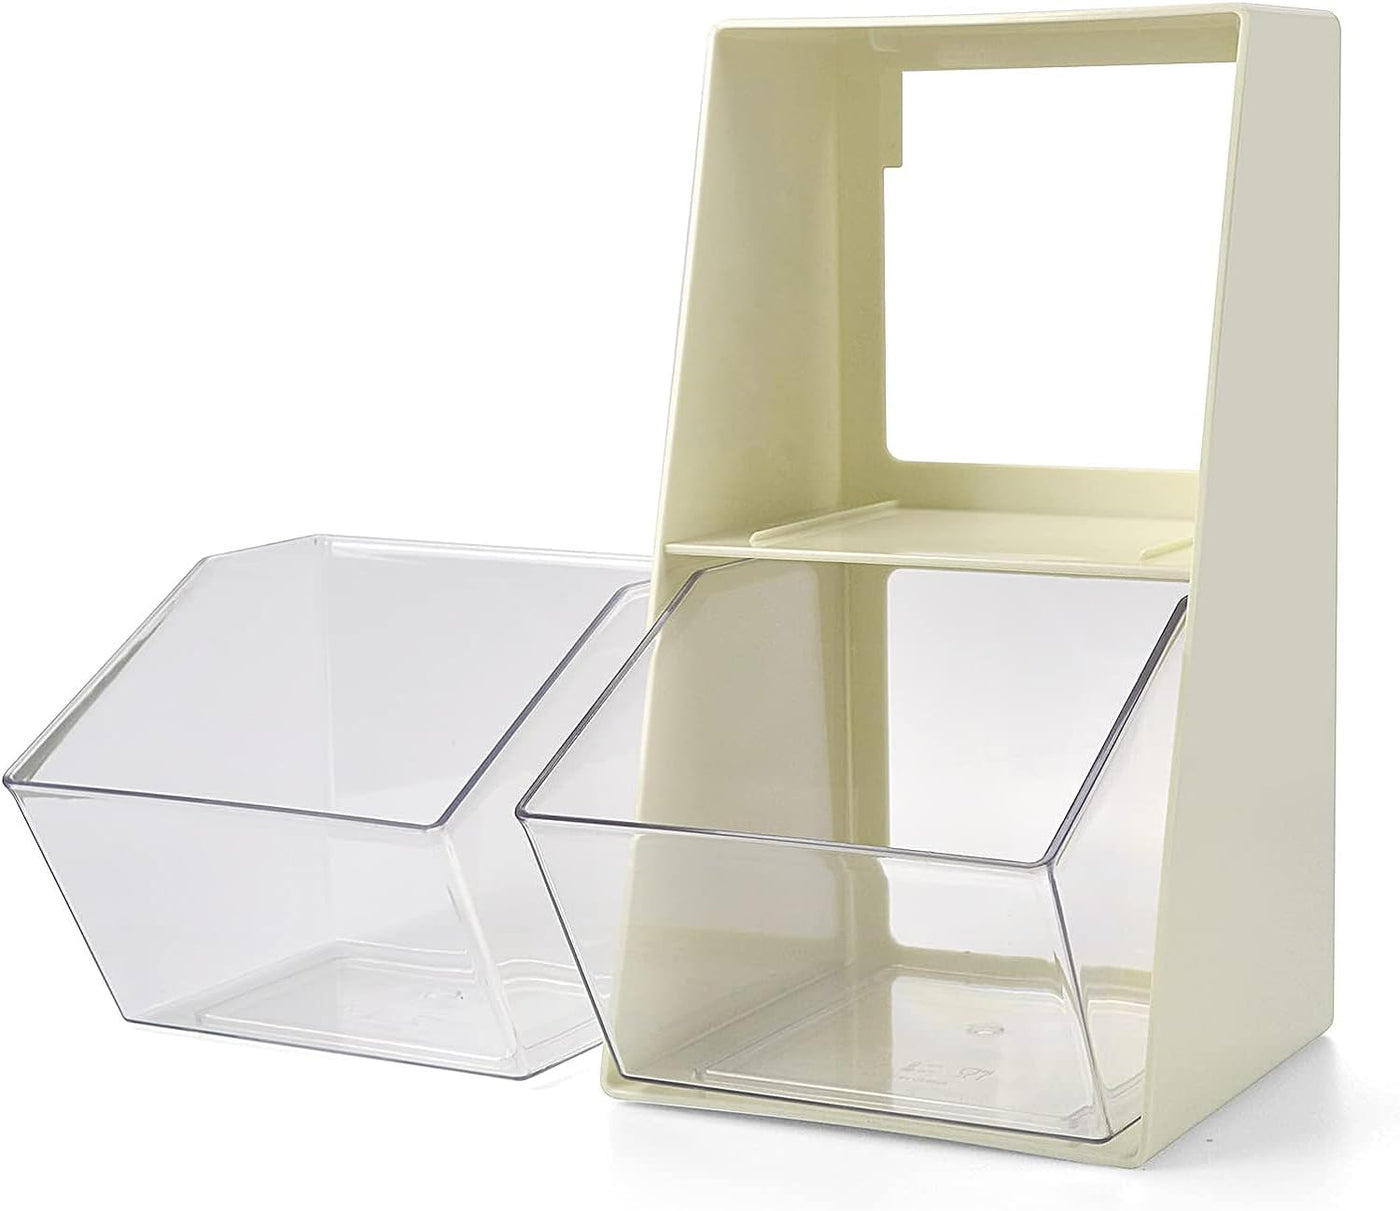 Detachable Storage Containers Box with 2 Compartments Drawers